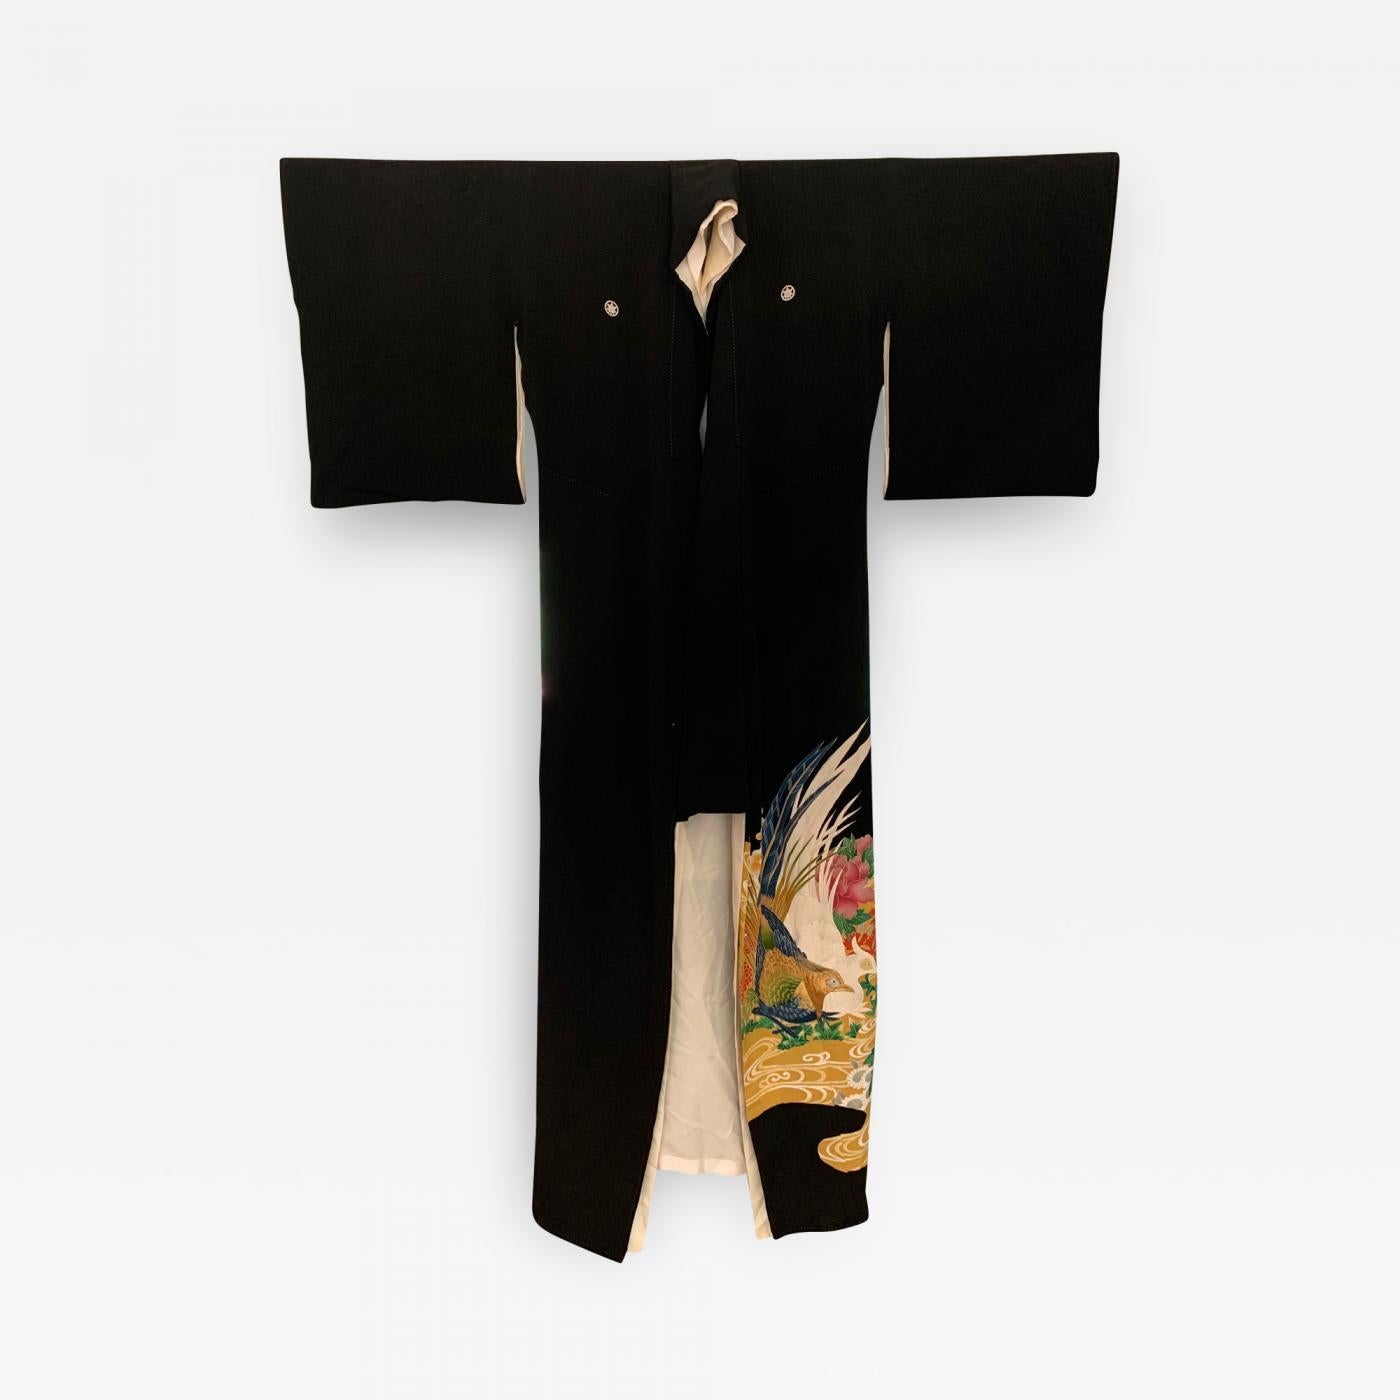 A vintage Japanese silk Kuro Tomesode Kimono, circa 1960s-1980s. Kuro Tomesode is a dress for married woman for the most formal occasions, equivalent of the evening gowns in the west. It is overall black, decorated only with patterns of bright